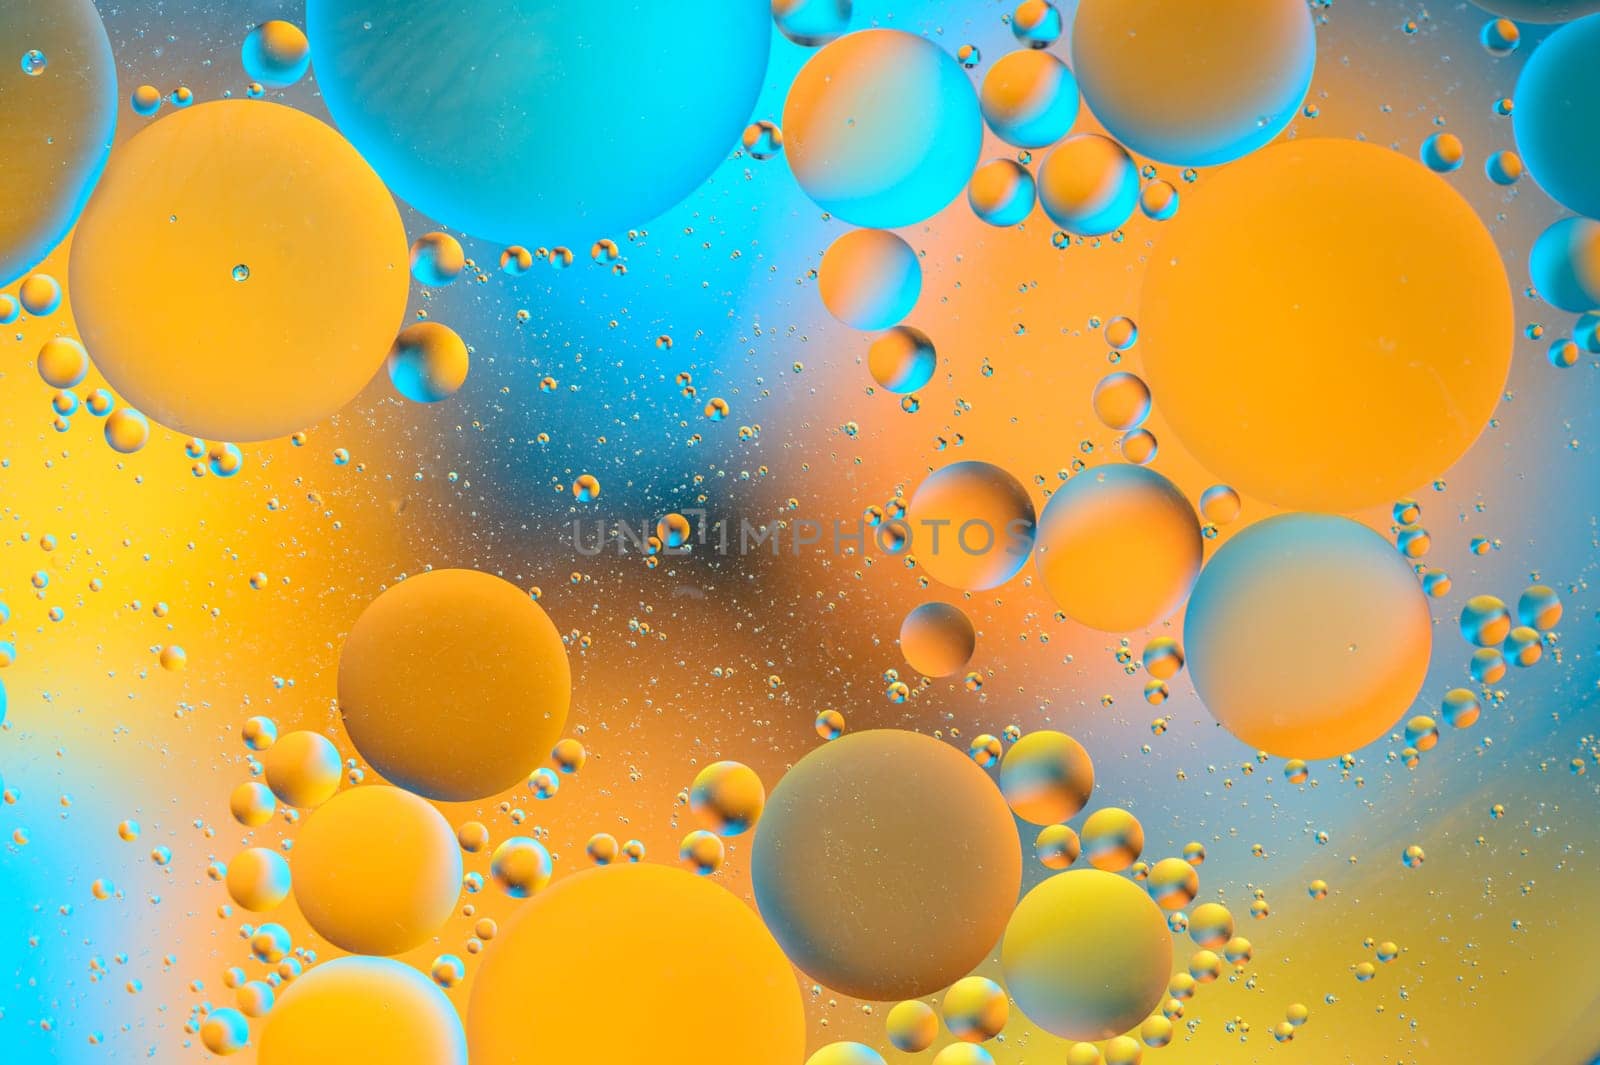 abstract background of multi-colored spots and circles microcosm universe galaxy 11 by Mixa74